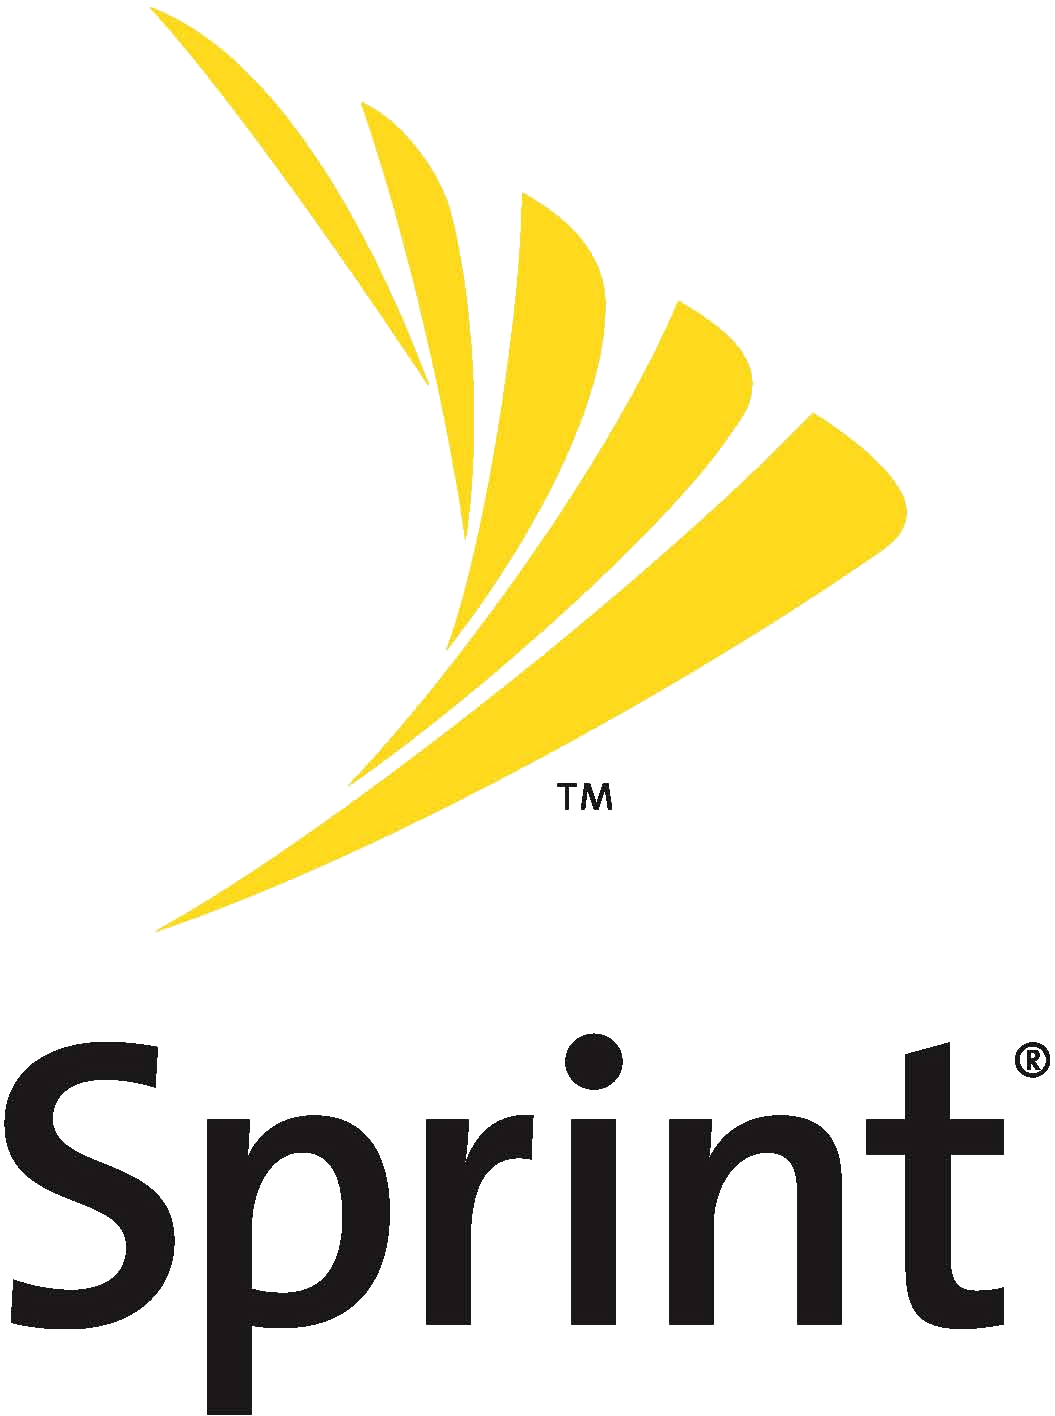 Sprint Suffers Another Shipment Delay, This Time with the Samsung Galaxy S III